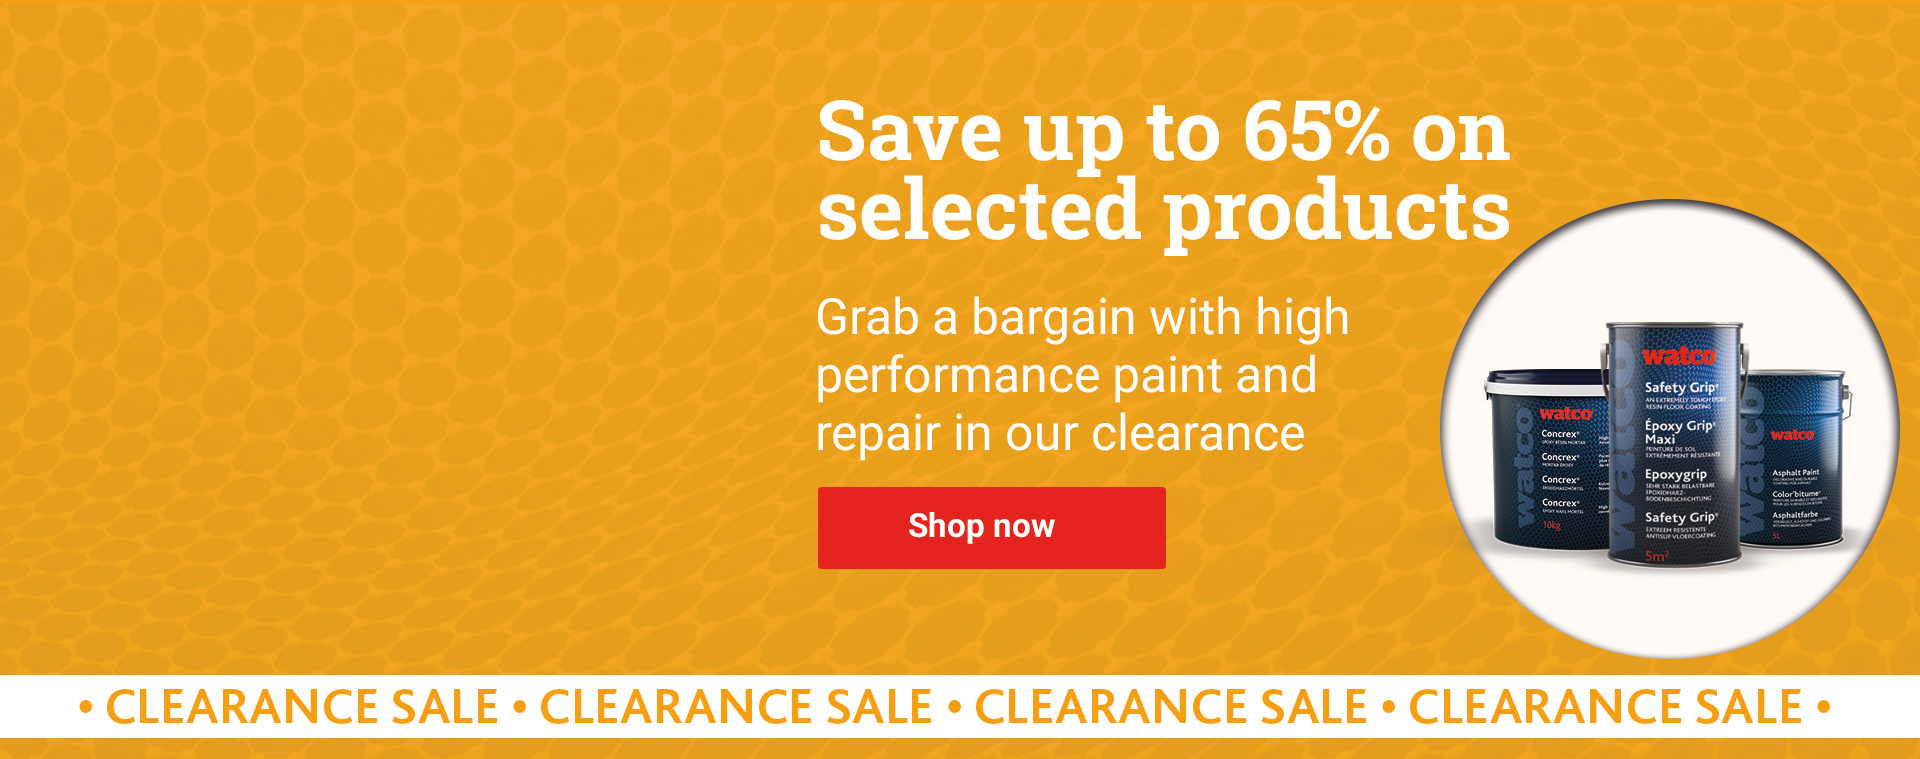 Up to 65% off on our clearance